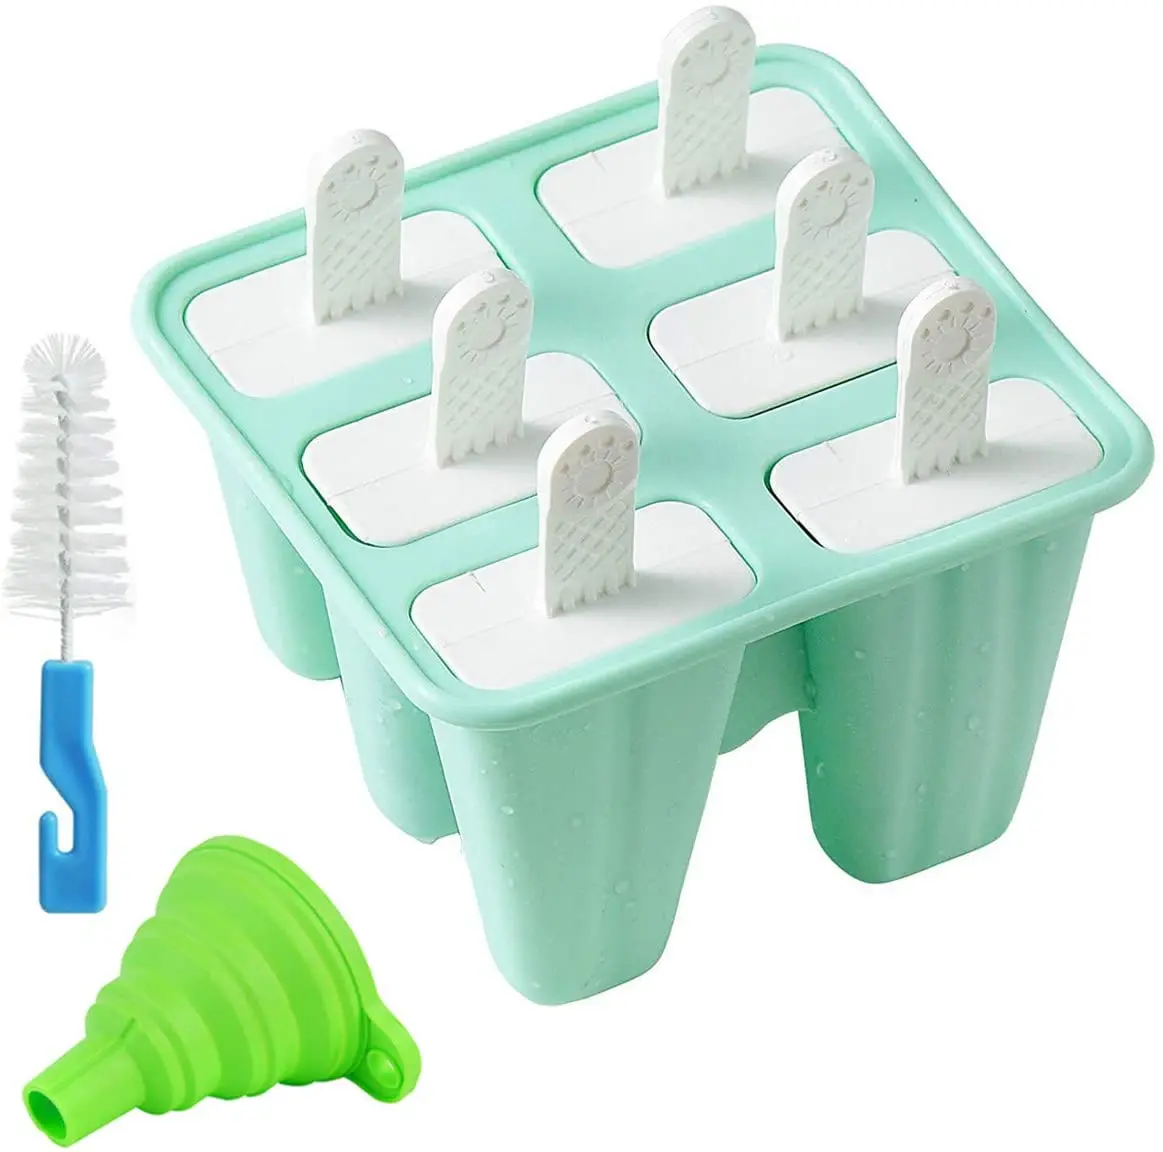 

BPA Free Eco-friendly Easy Release 6 Pieces Silicone Ice Cream Mold Set with Cleaning Brush and Funnel Silicon Ice Pop Maker, Custom pantone colors